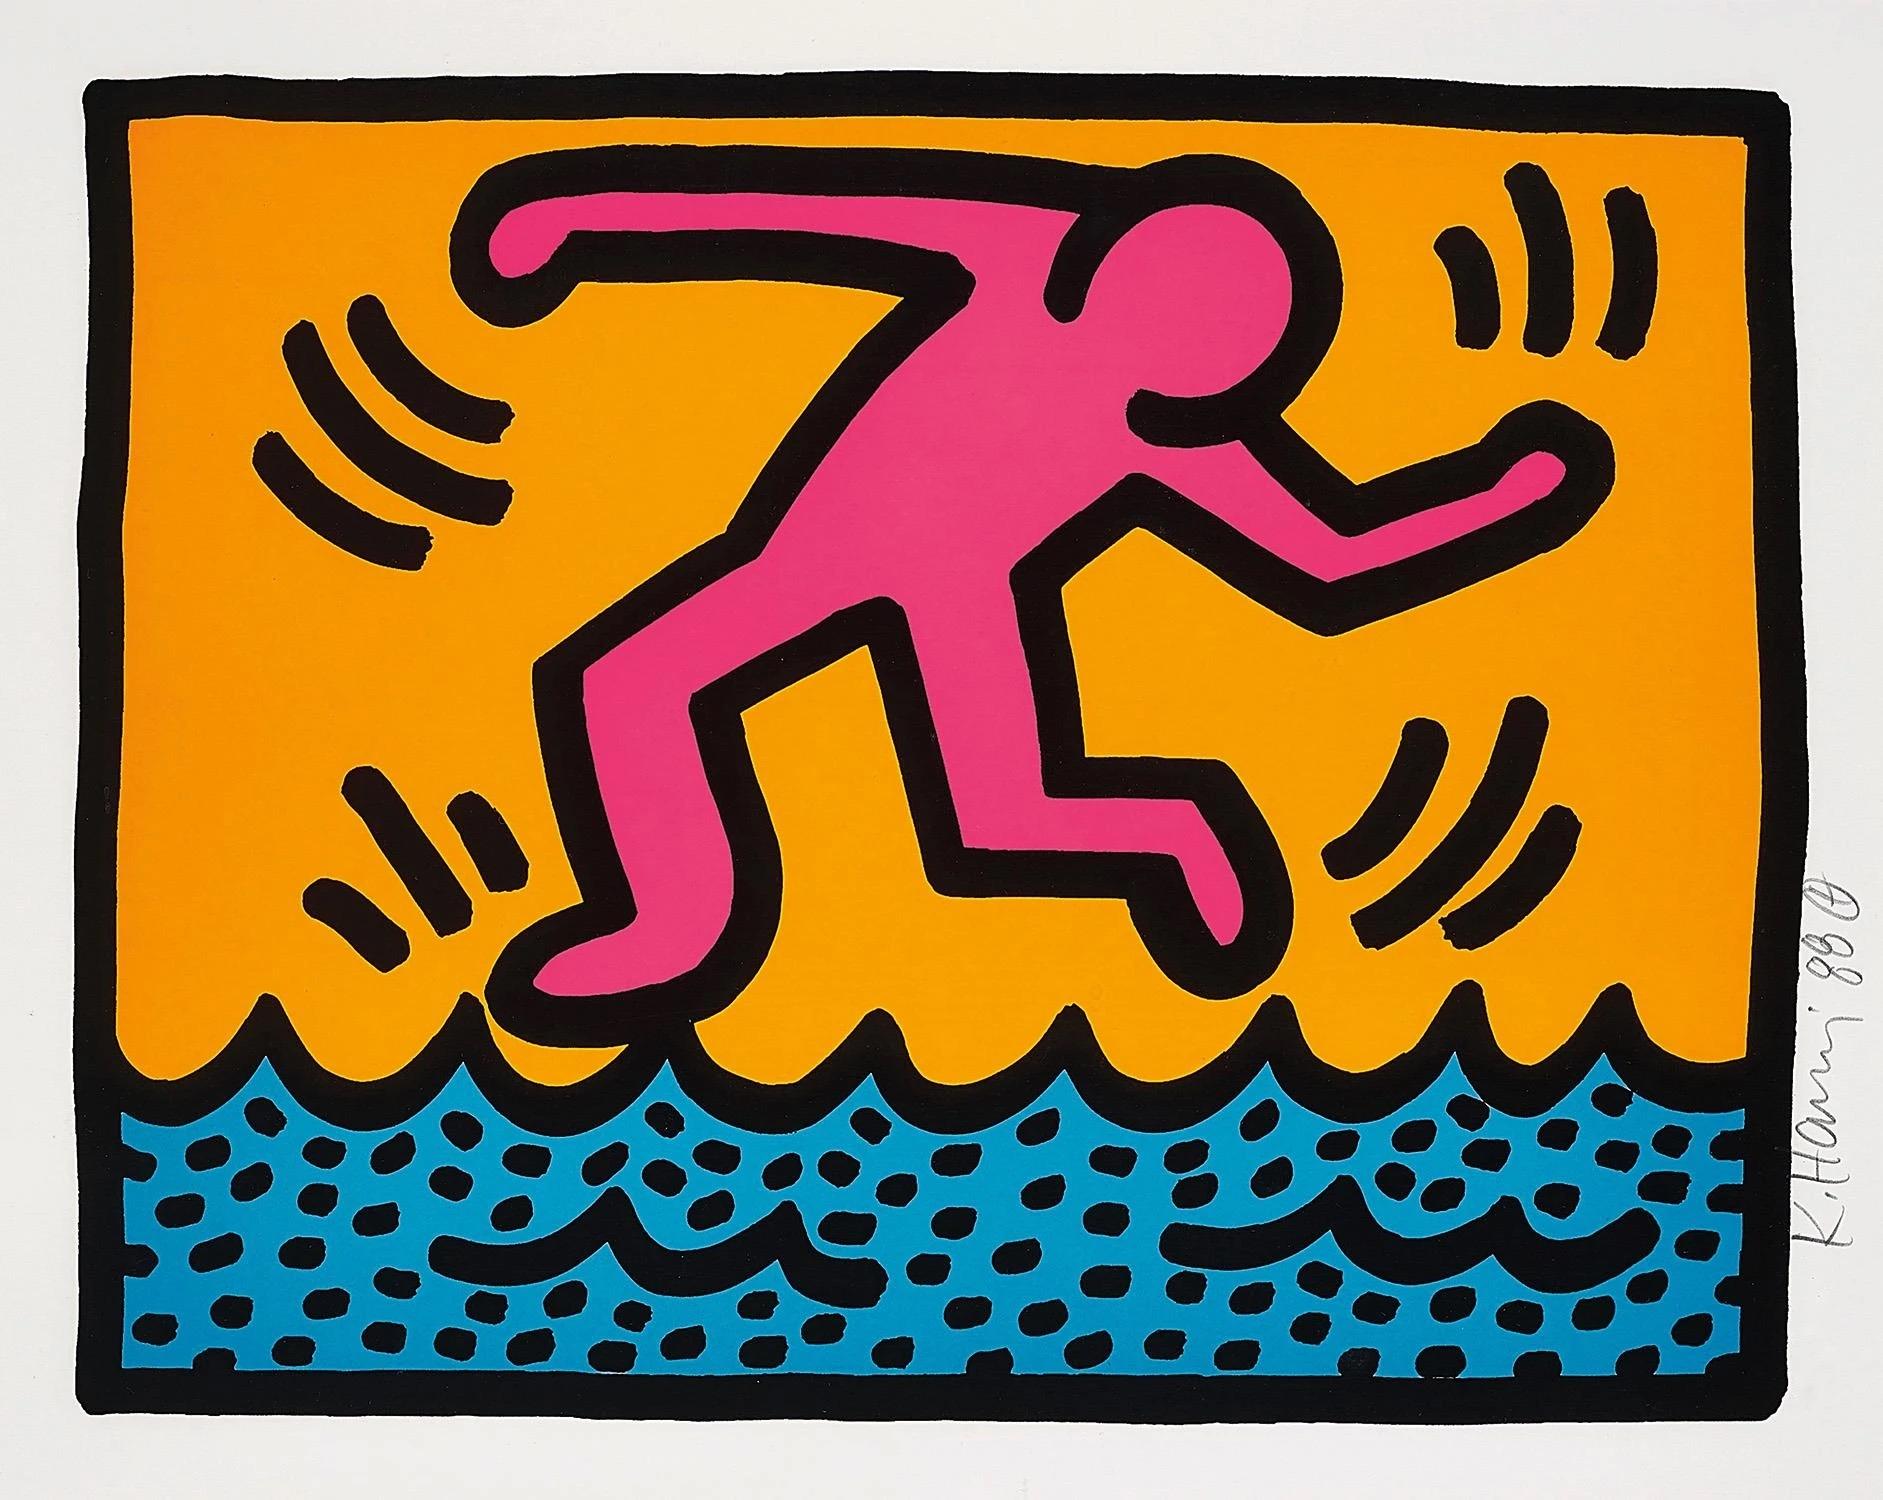 Abstract Print Keith Haring - Une planche Pop Shop II (L. pp. 96-97)